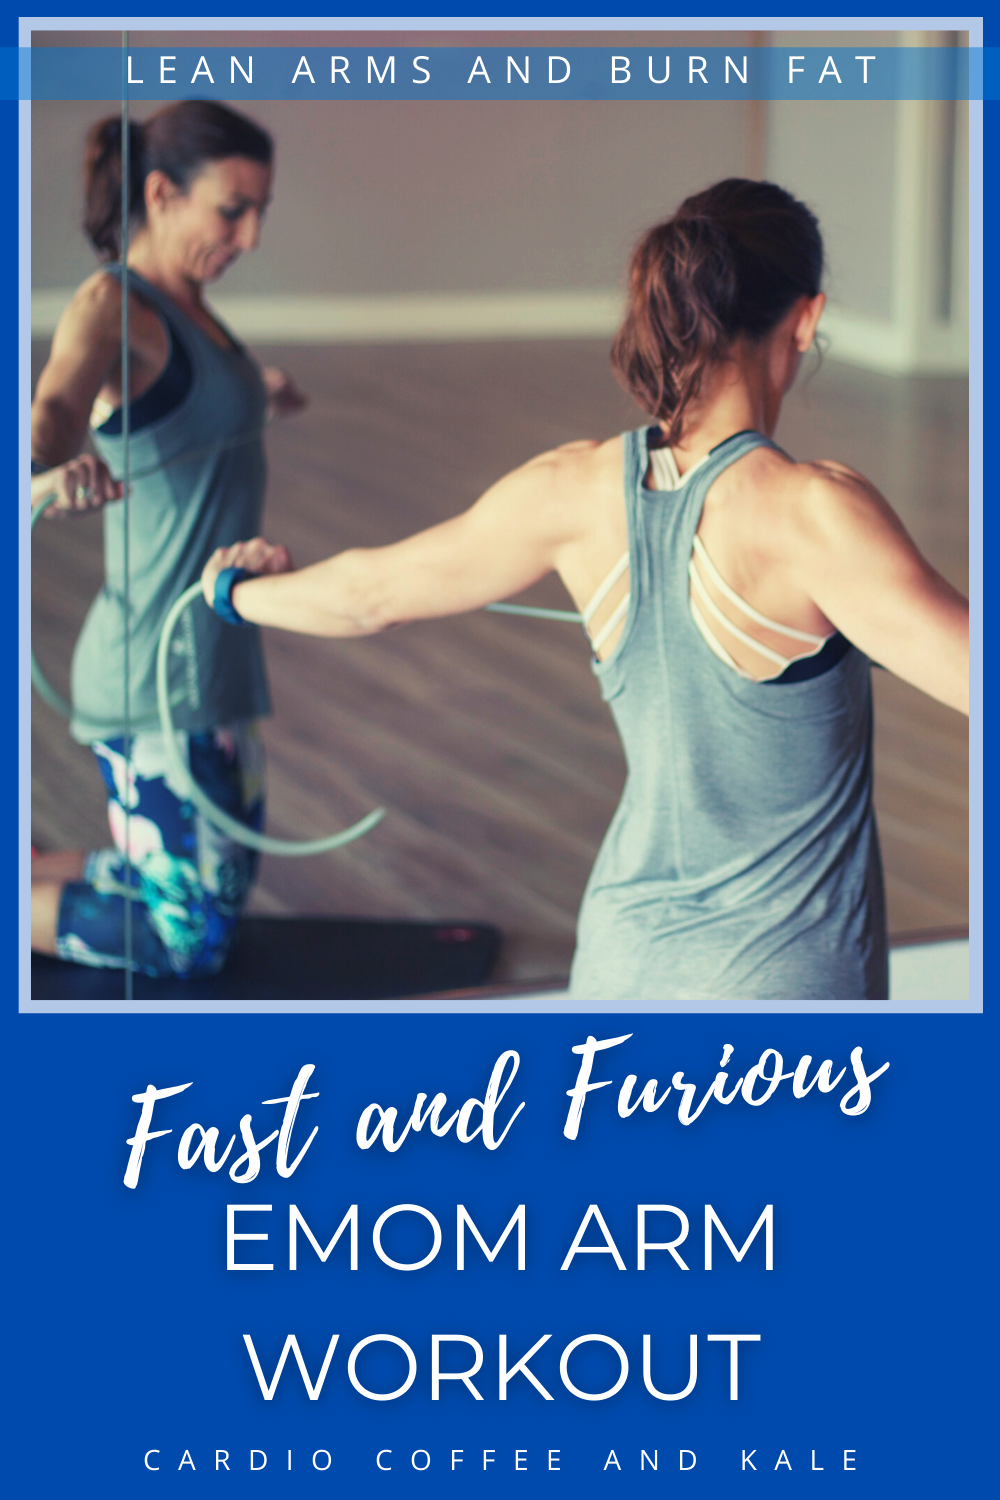 Fast and Furious EMOM Arm Workout — cardio coffee and kale